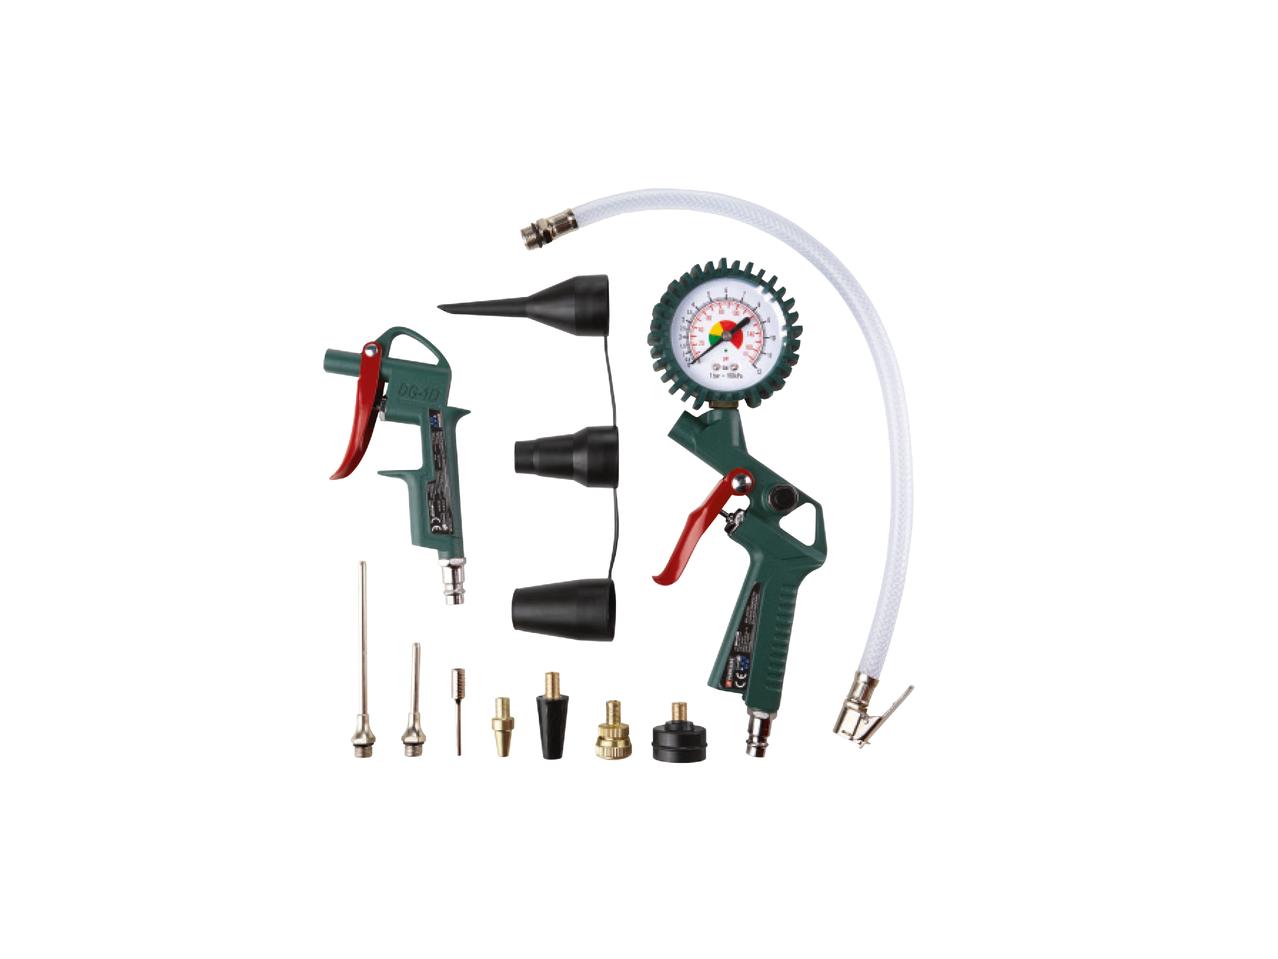 PARKSIDE(R) Pneumatic Tool Accessory Set